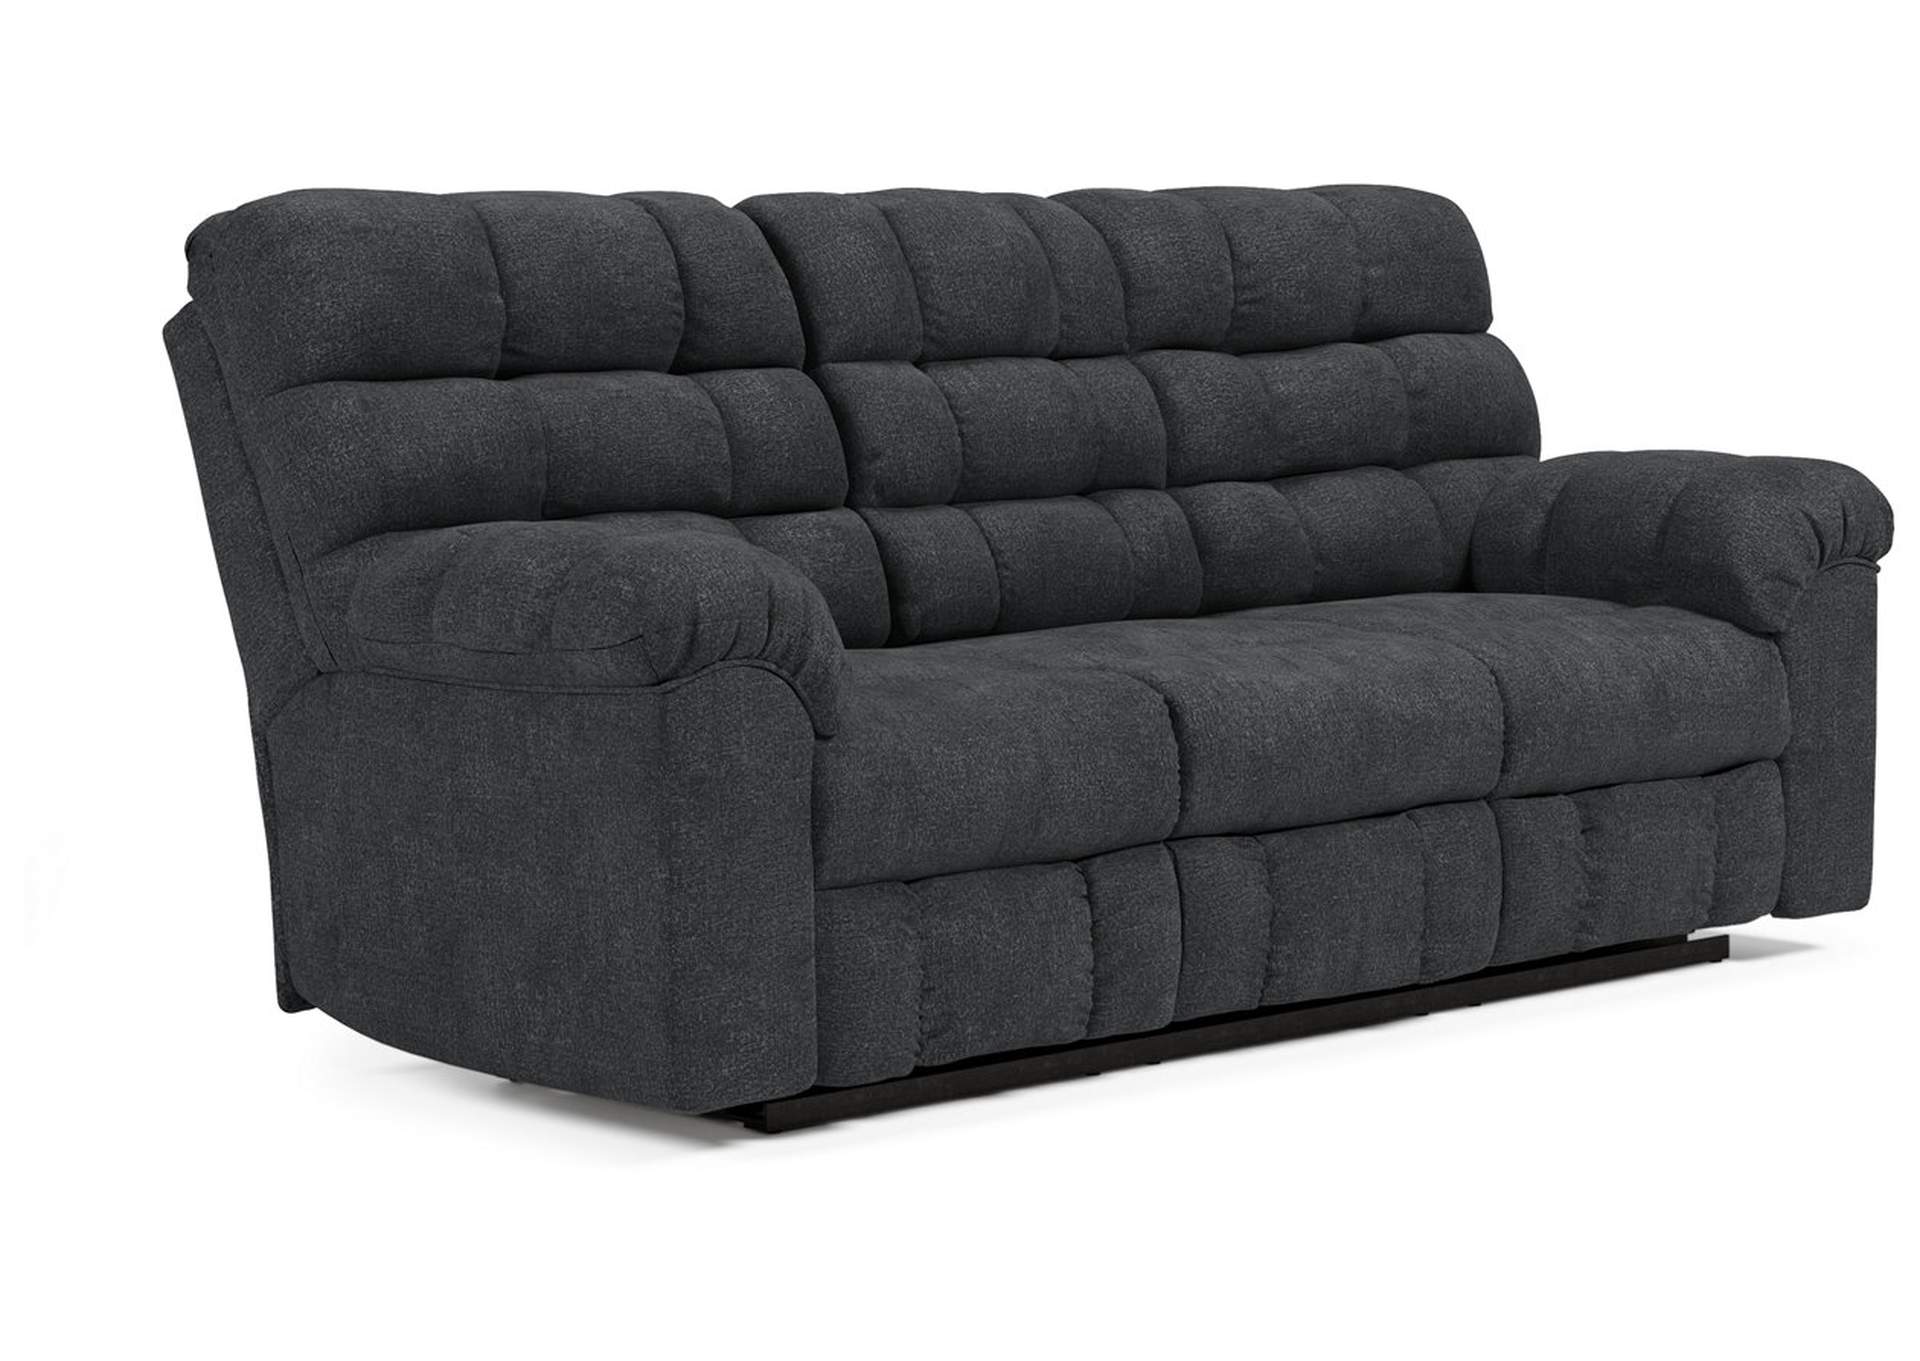 Wilhurst Sofa and Loveseat,Signature Design By Ashley